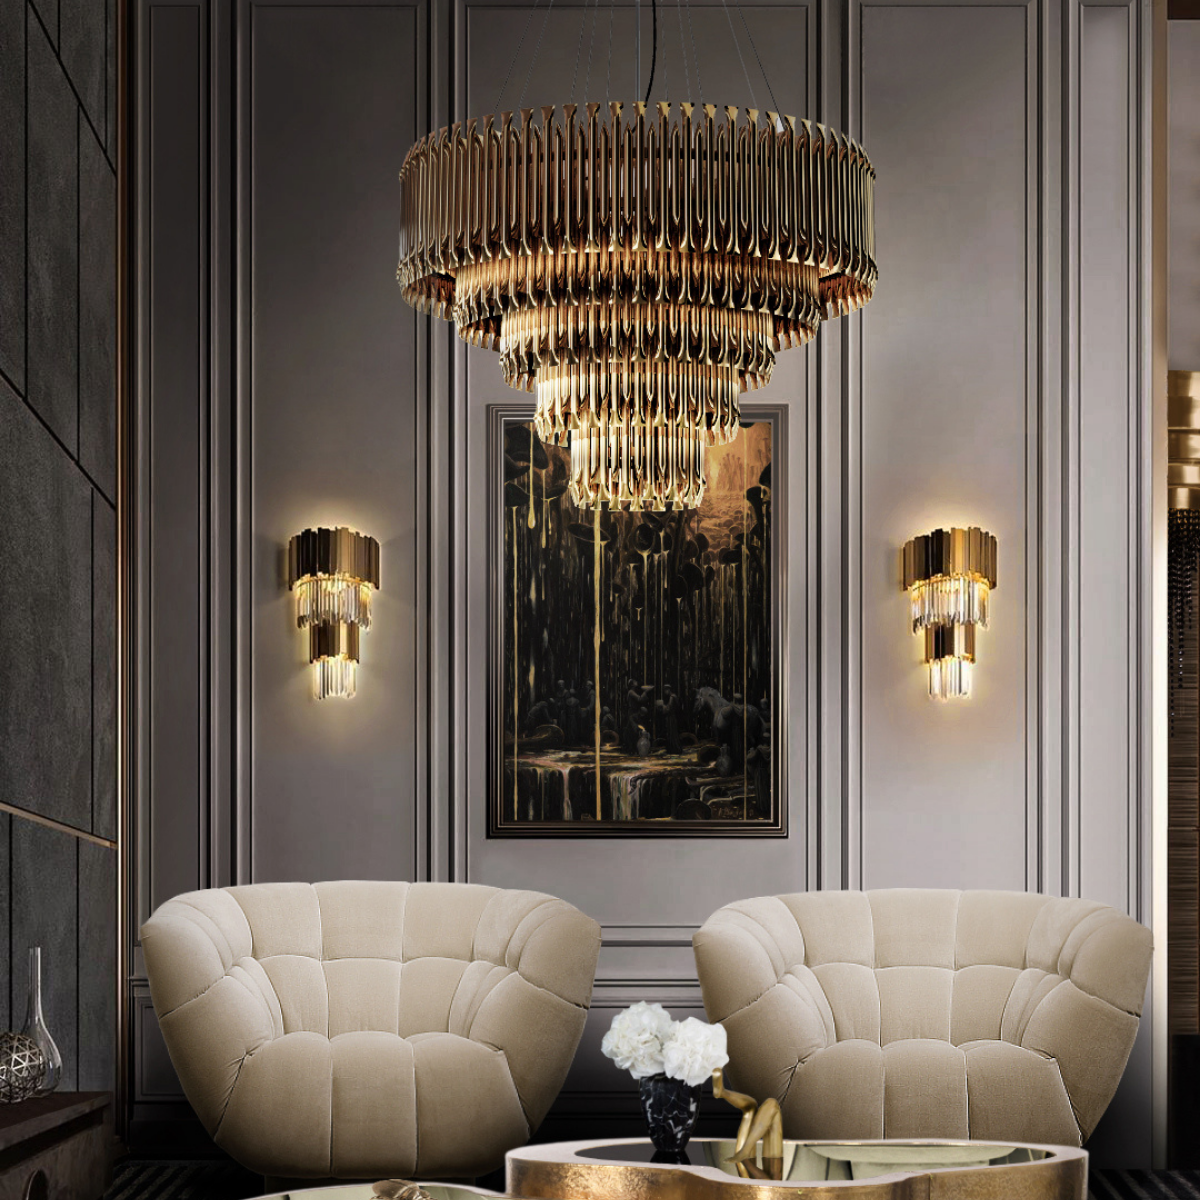 Living Room Project Featuring Matheny Chandelier by Luxxu Covet Lighting